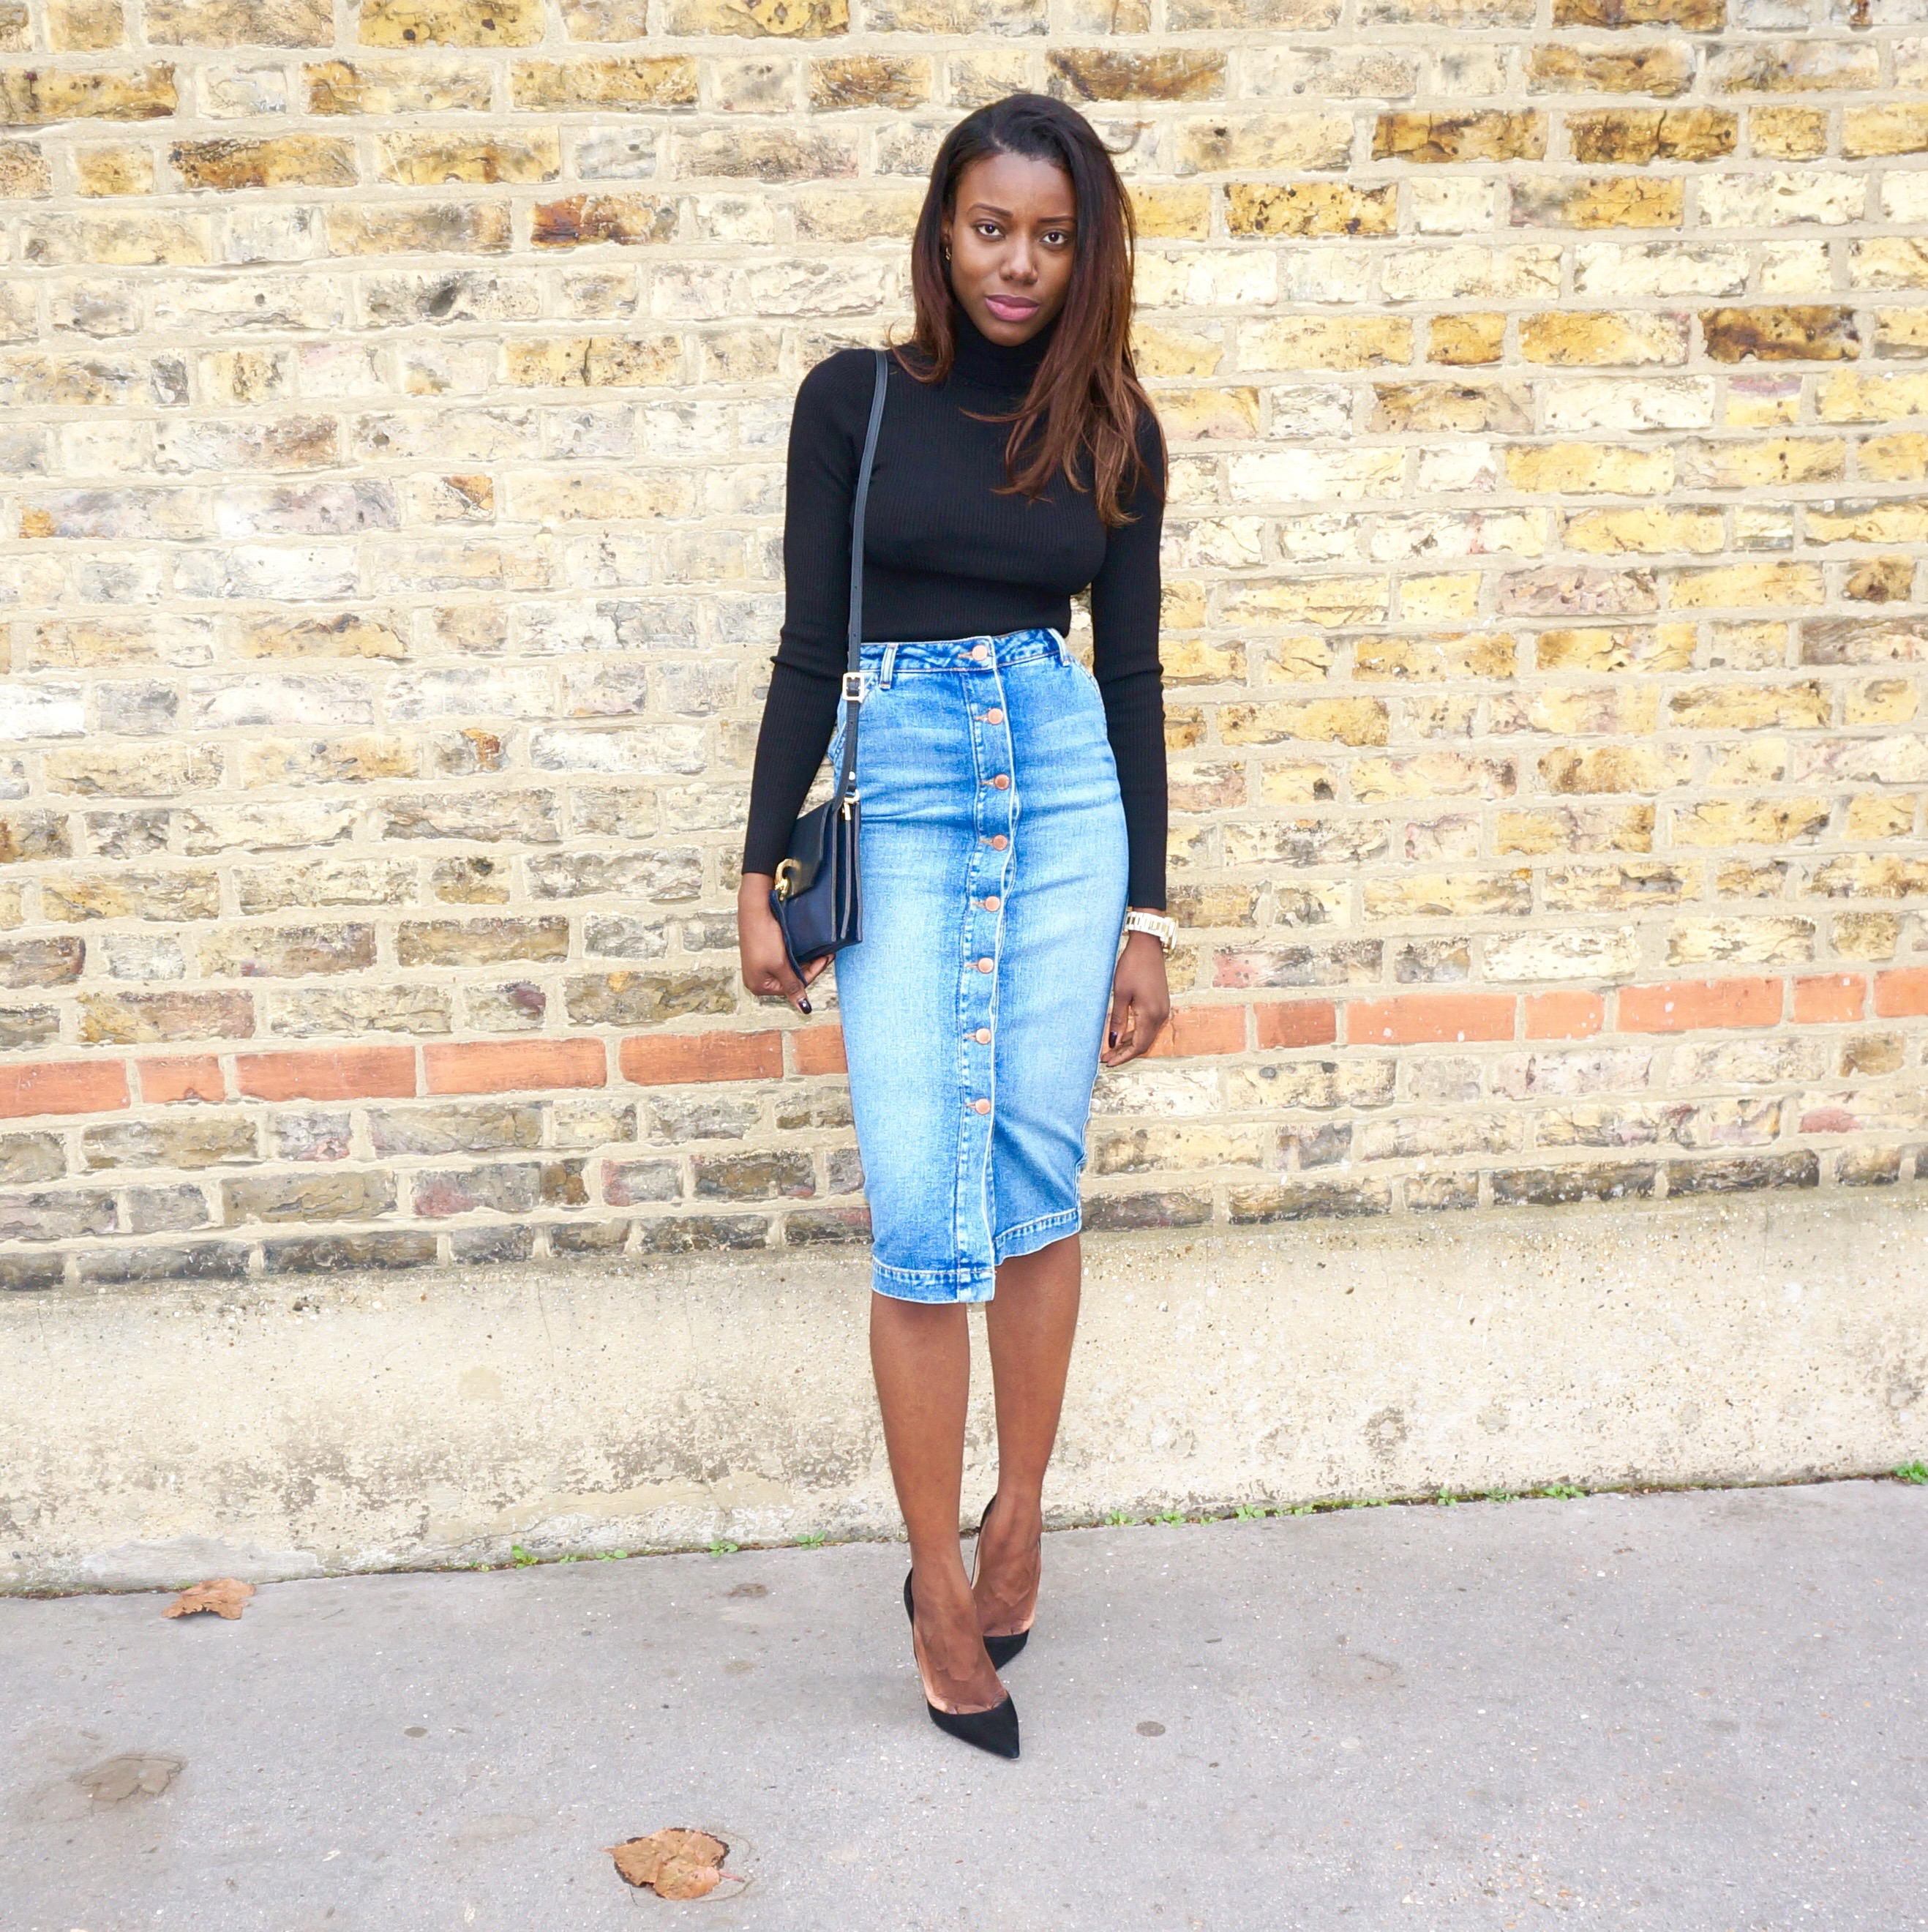 Fashion Bombshell of the Day: Akua from London – Fashion Bomb Daily